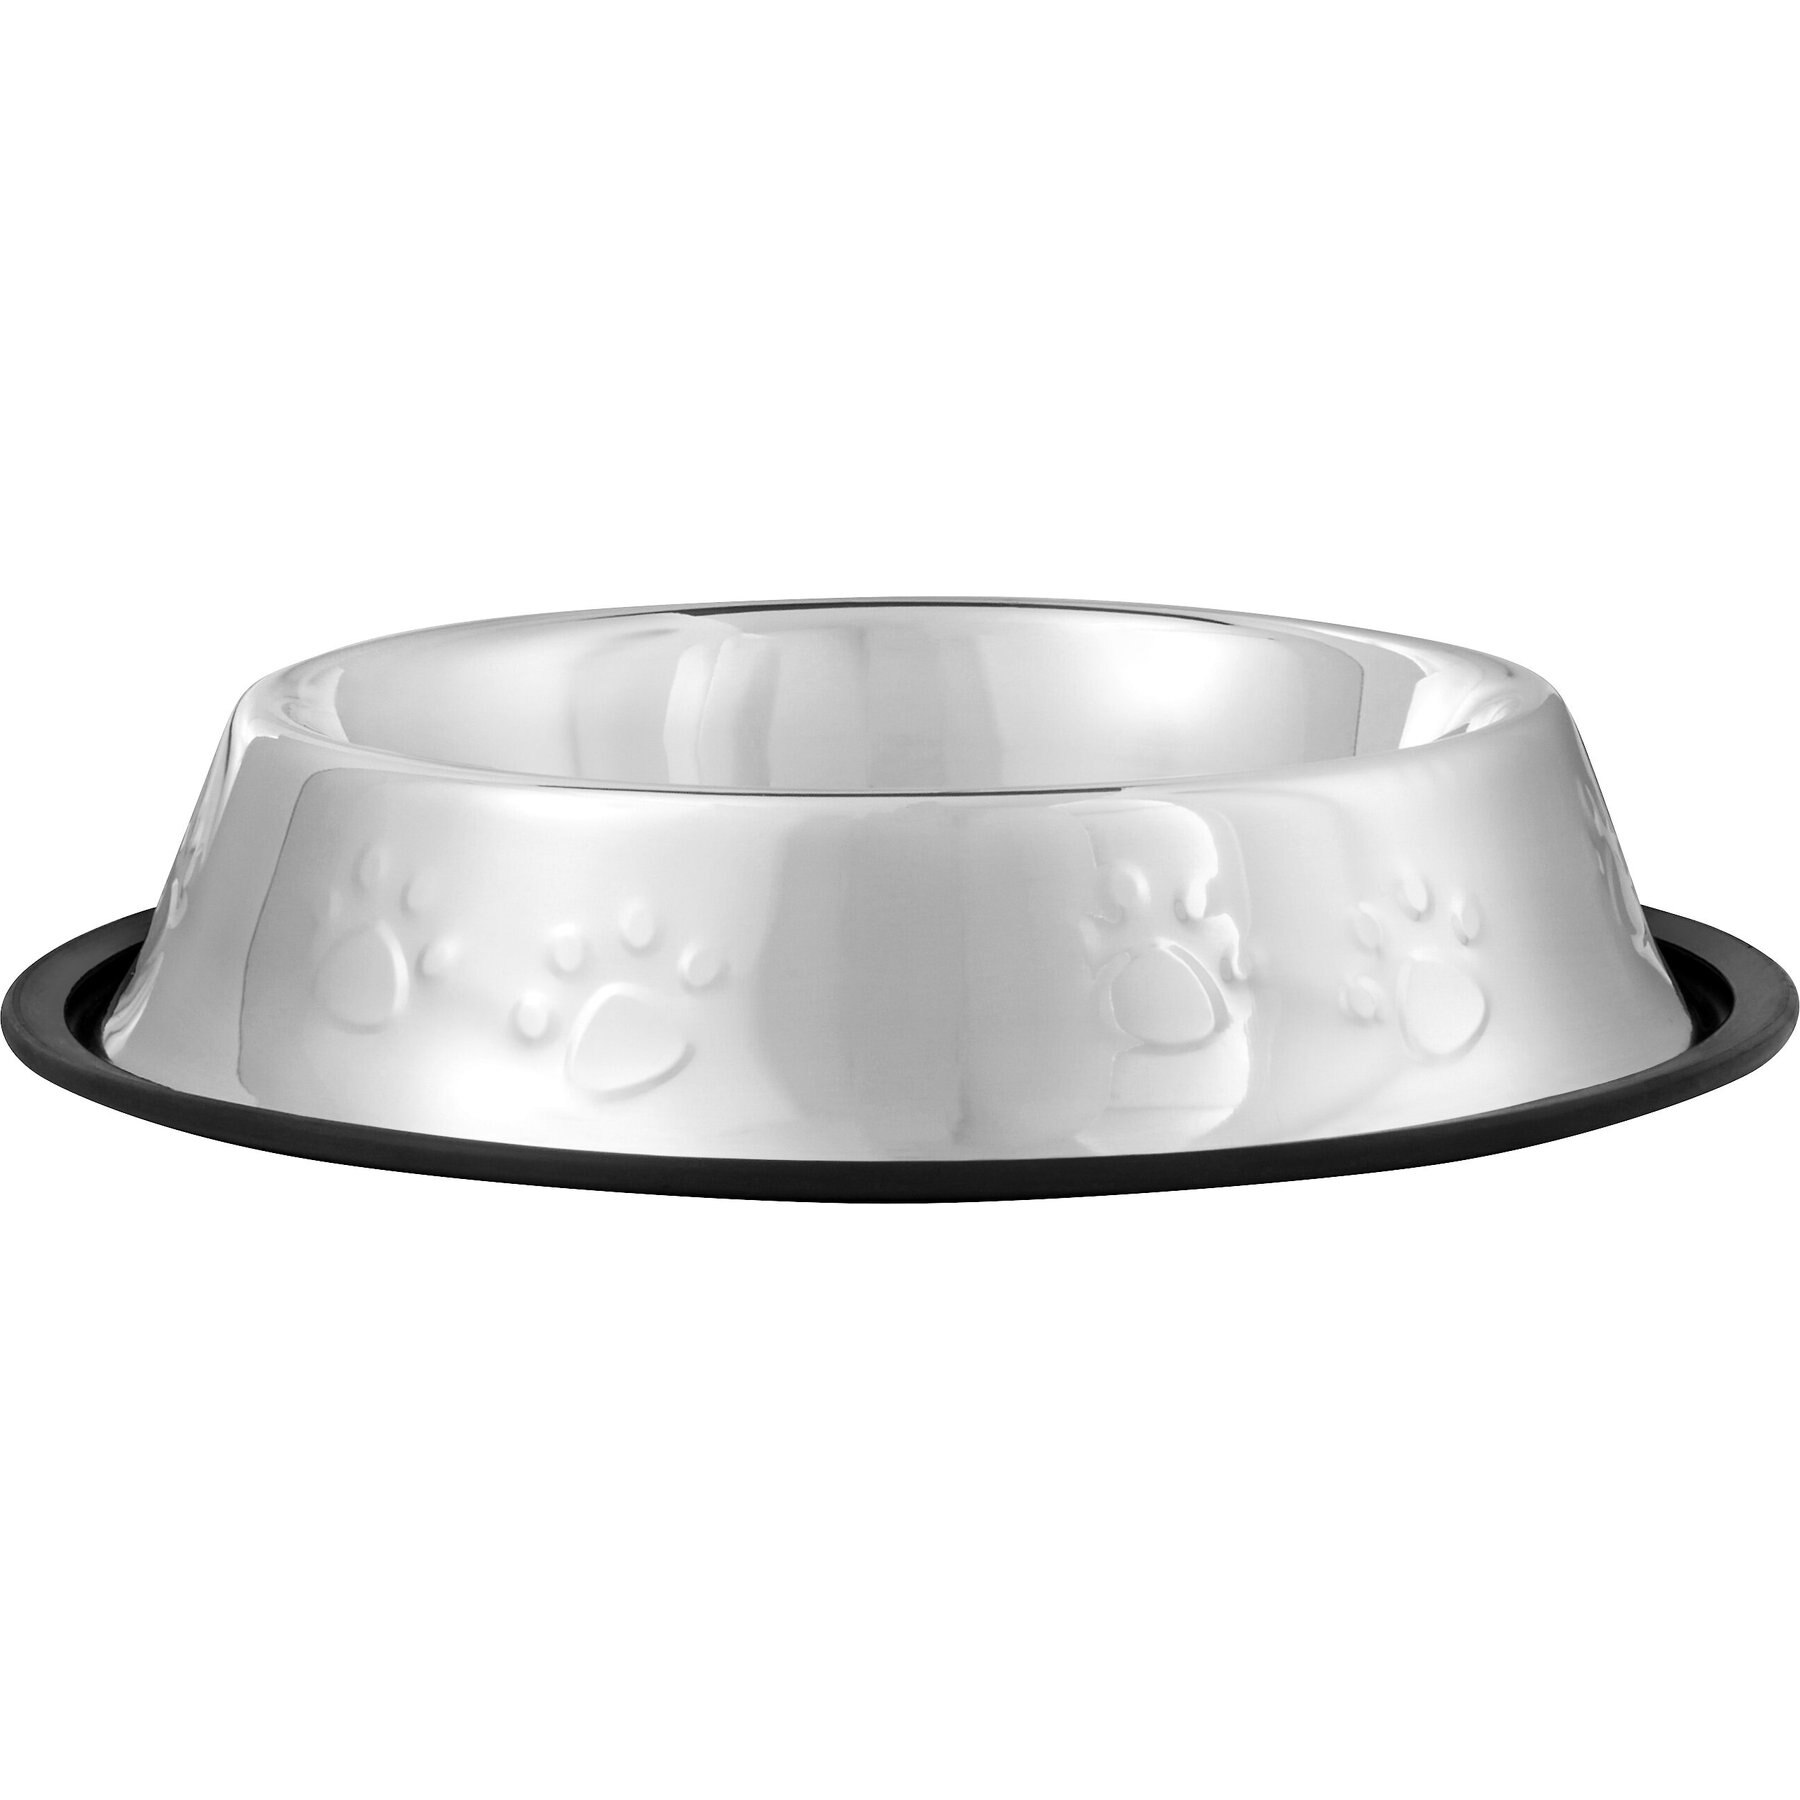 Frisco Non-Skid Stainless Steel Dish Dog & Cat Bowl